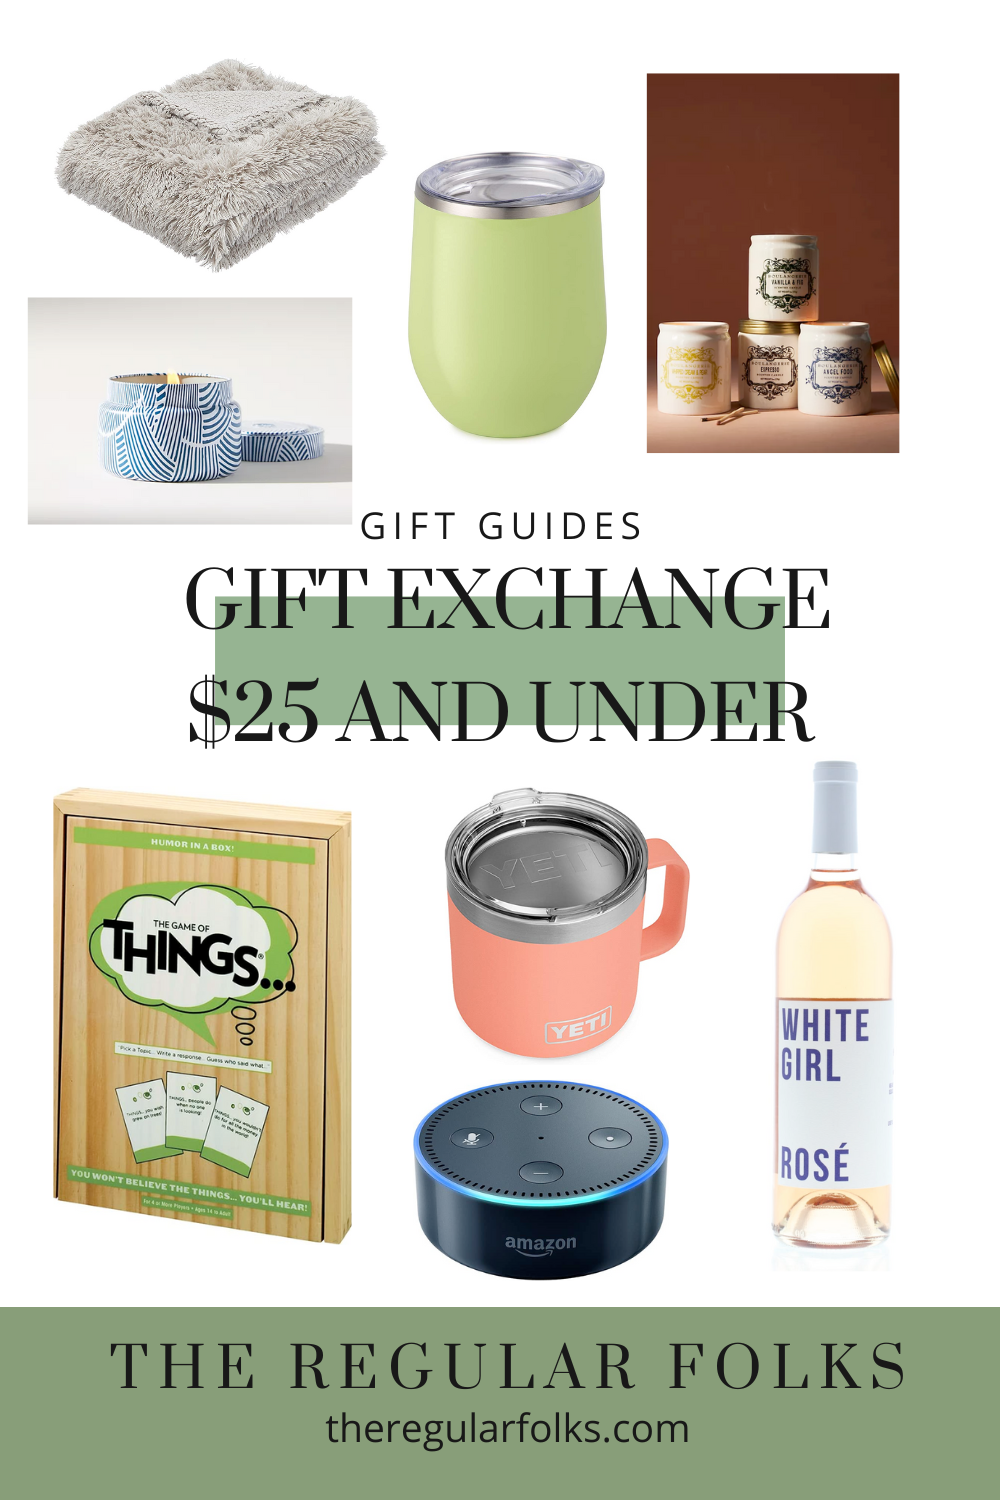 Gift Guide: Quick Gift Ideas for White Elephant and Dirty Santa